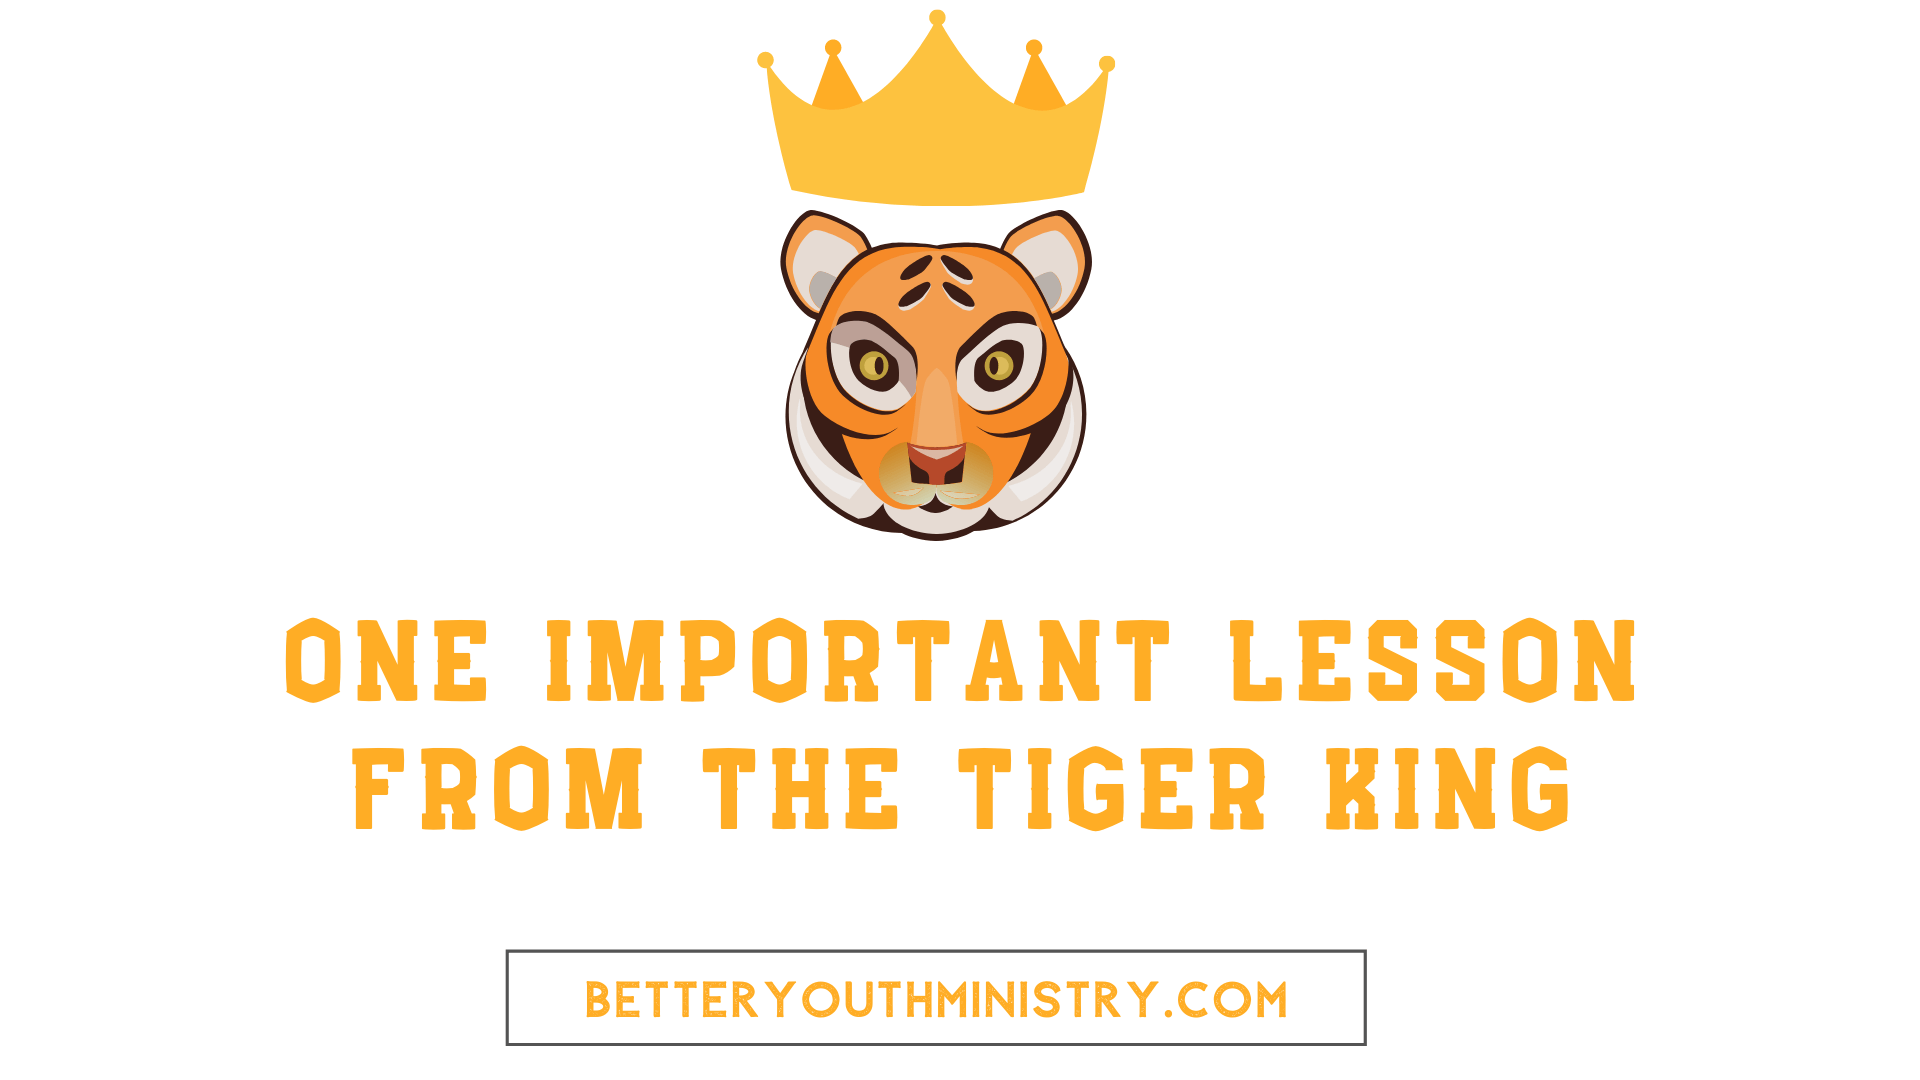 One Important Lesson from the Tiger King